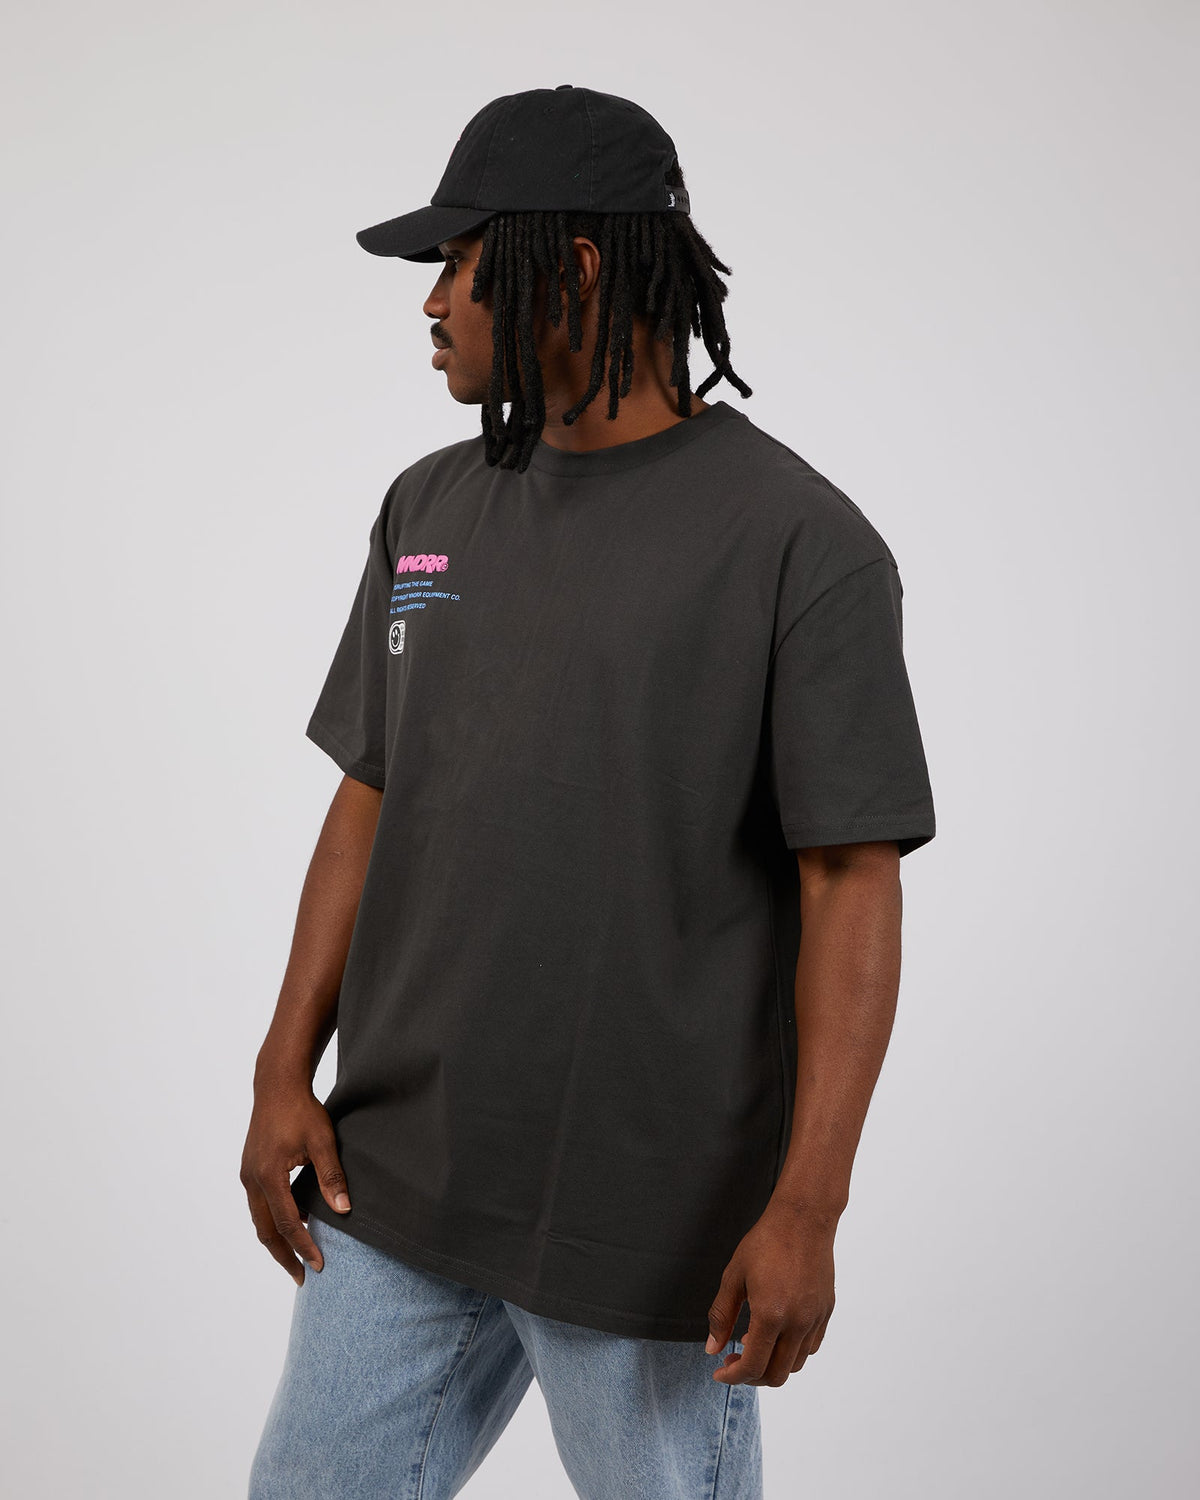 Wndrr-Obscure Box Fit Tee Faded Black-Edge Clothing